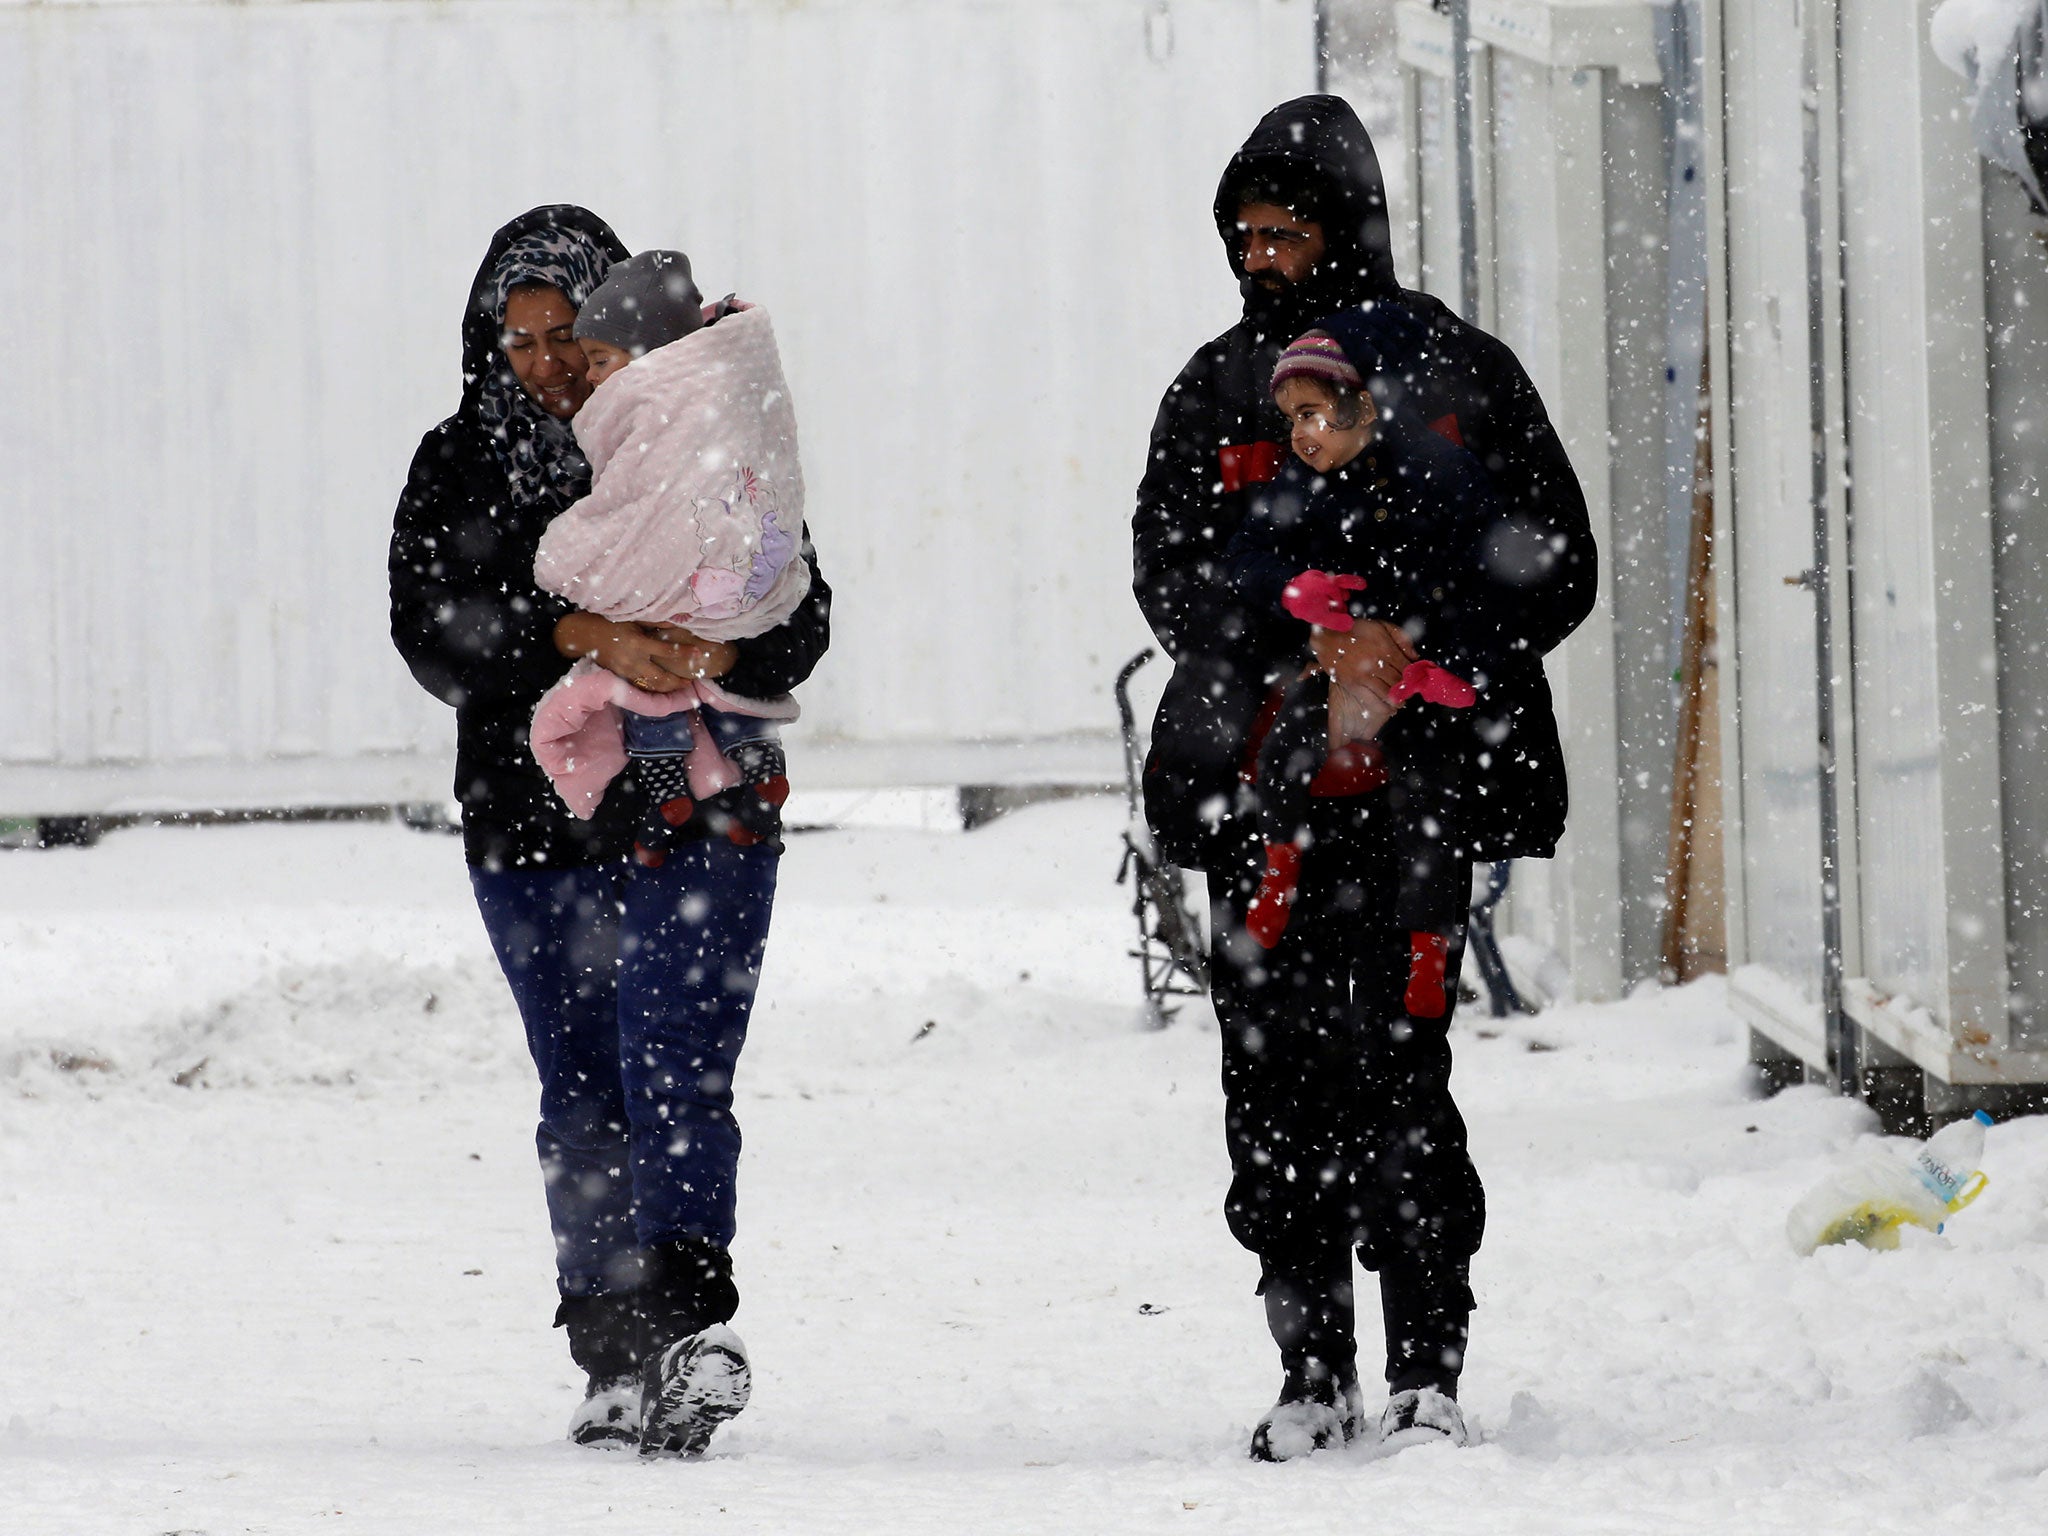 Syrian refugees carry their children through a snow storm at a refugee camp north of Athens, Greece, on 10 January